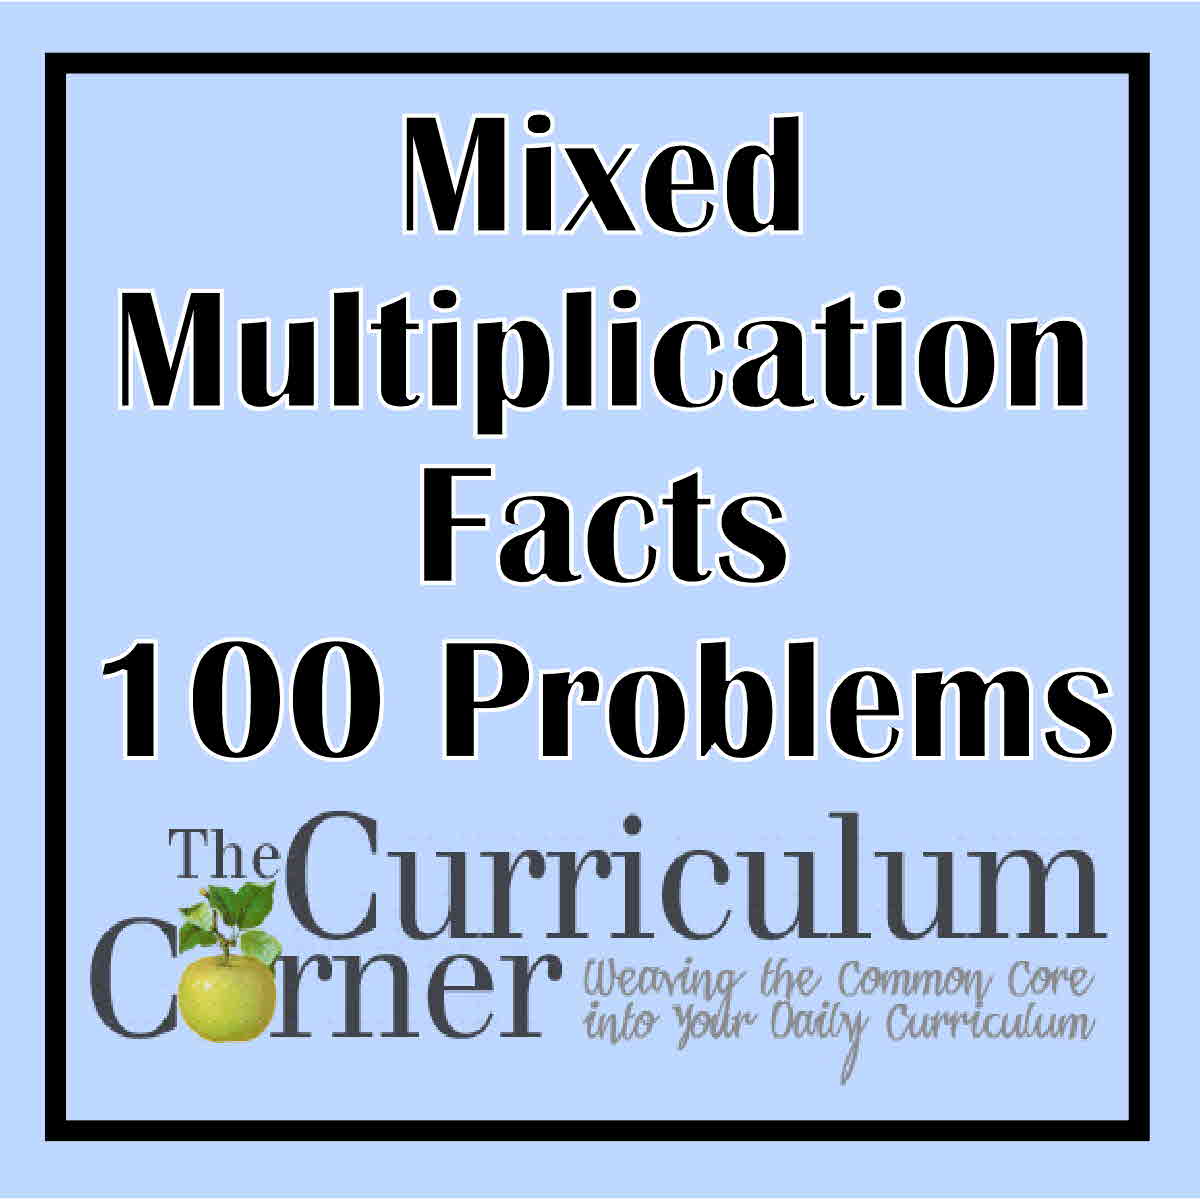  Mixed Multiplication Facts 100 Problems The Curriculum Corner 123